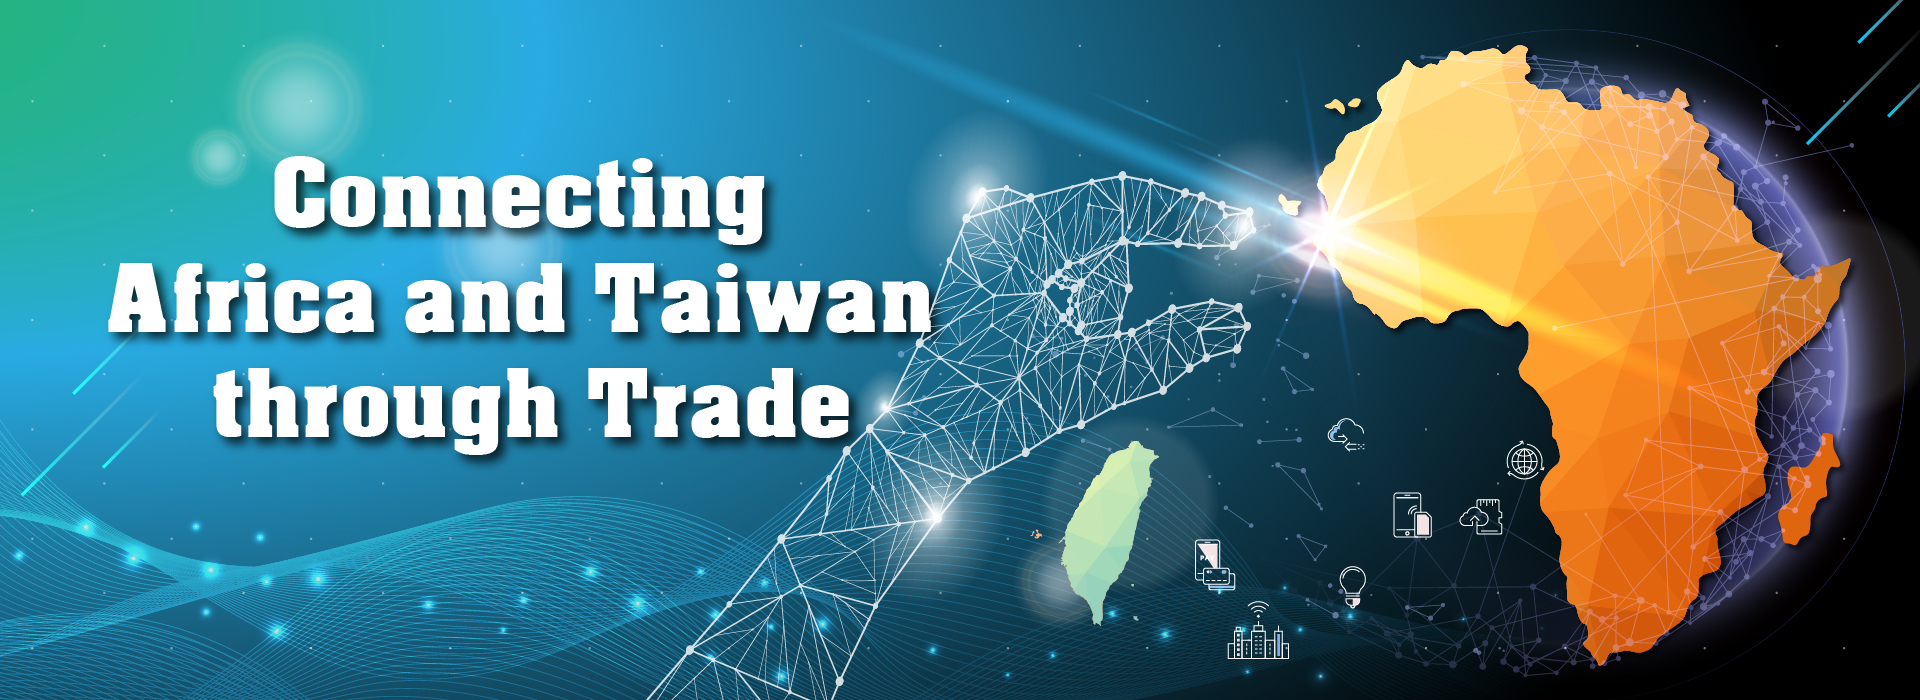 Connecting Africa and Taiwan Through Trade